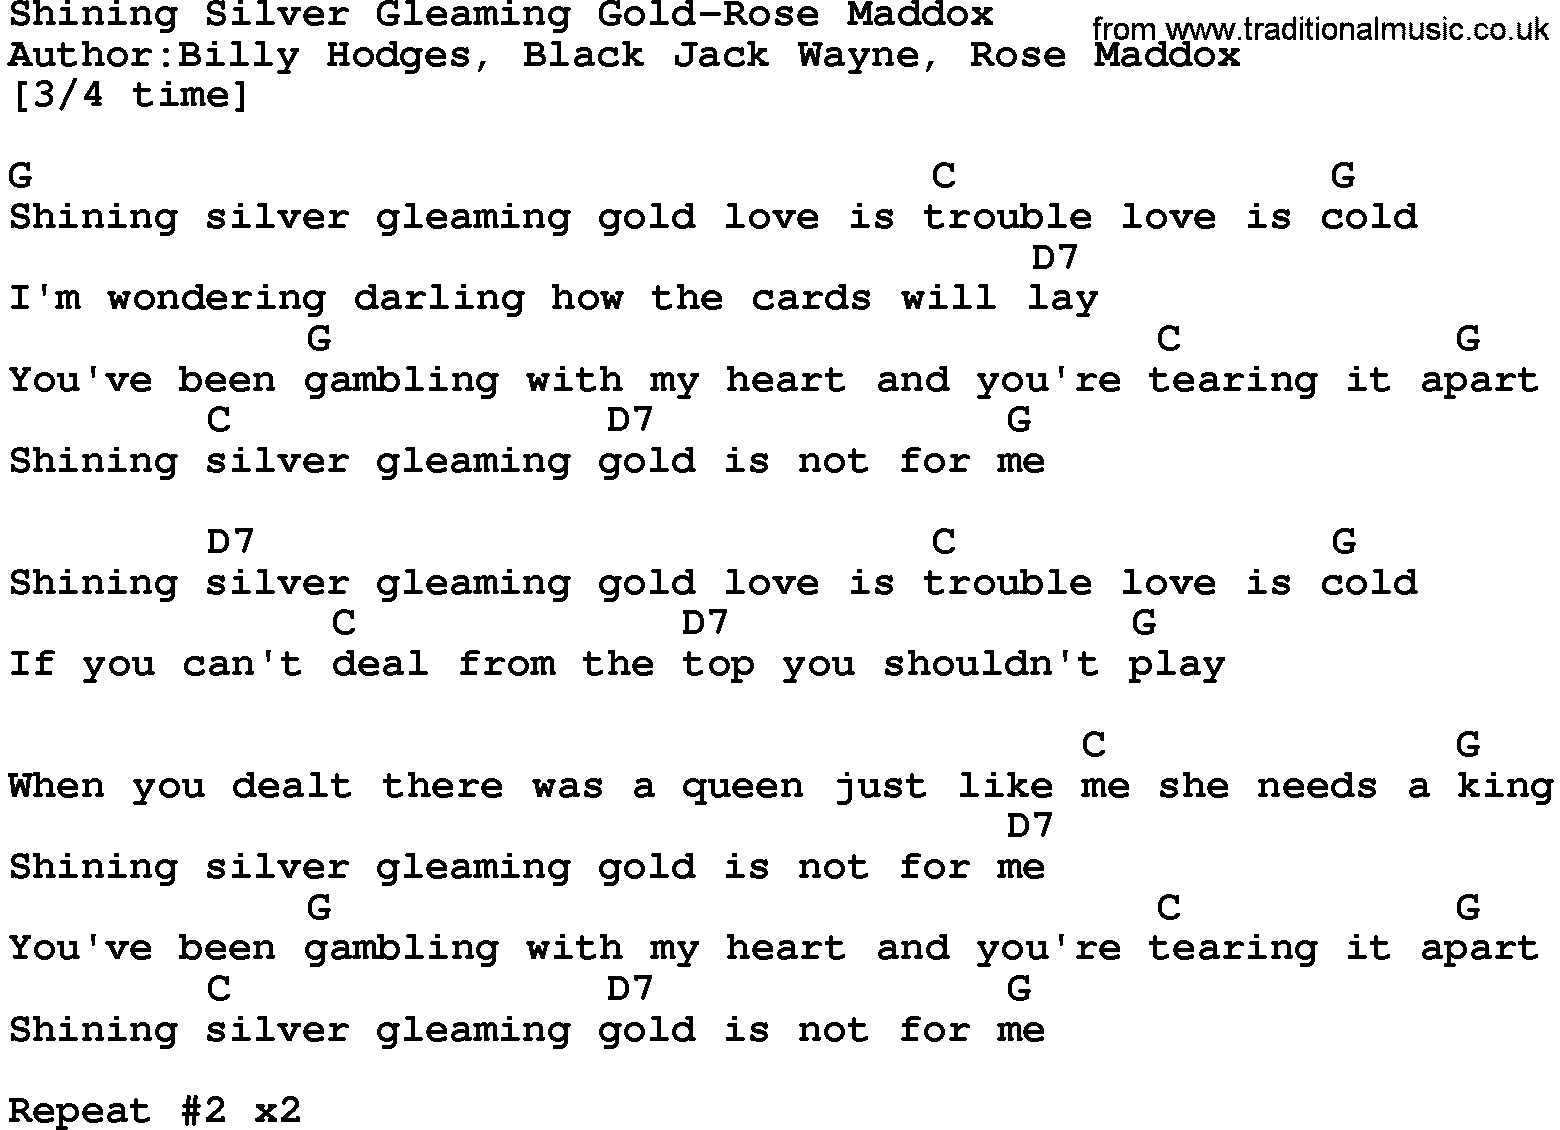 Country music song: Shining Silver Gleaming Gold-Rose Maddox lyrics and chords